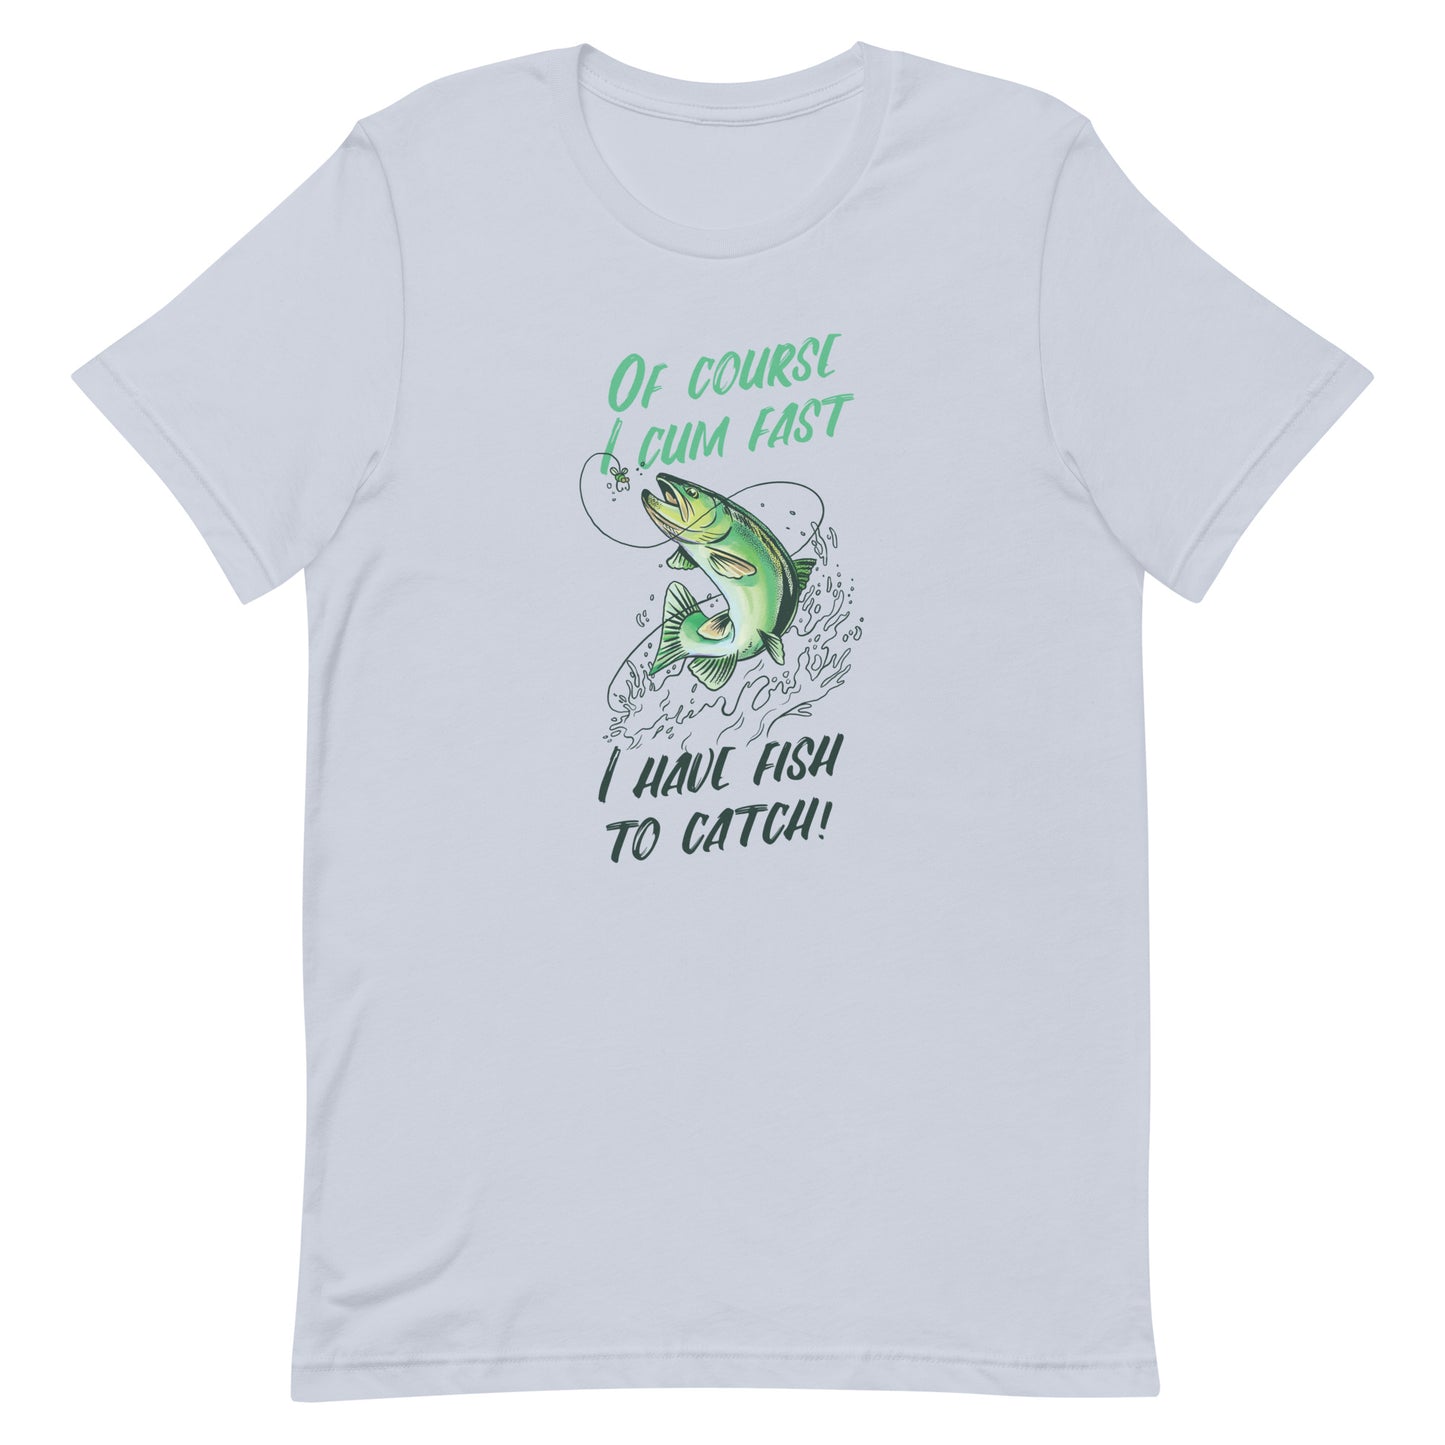 I Have Fish to Catch Unisex t-shirt